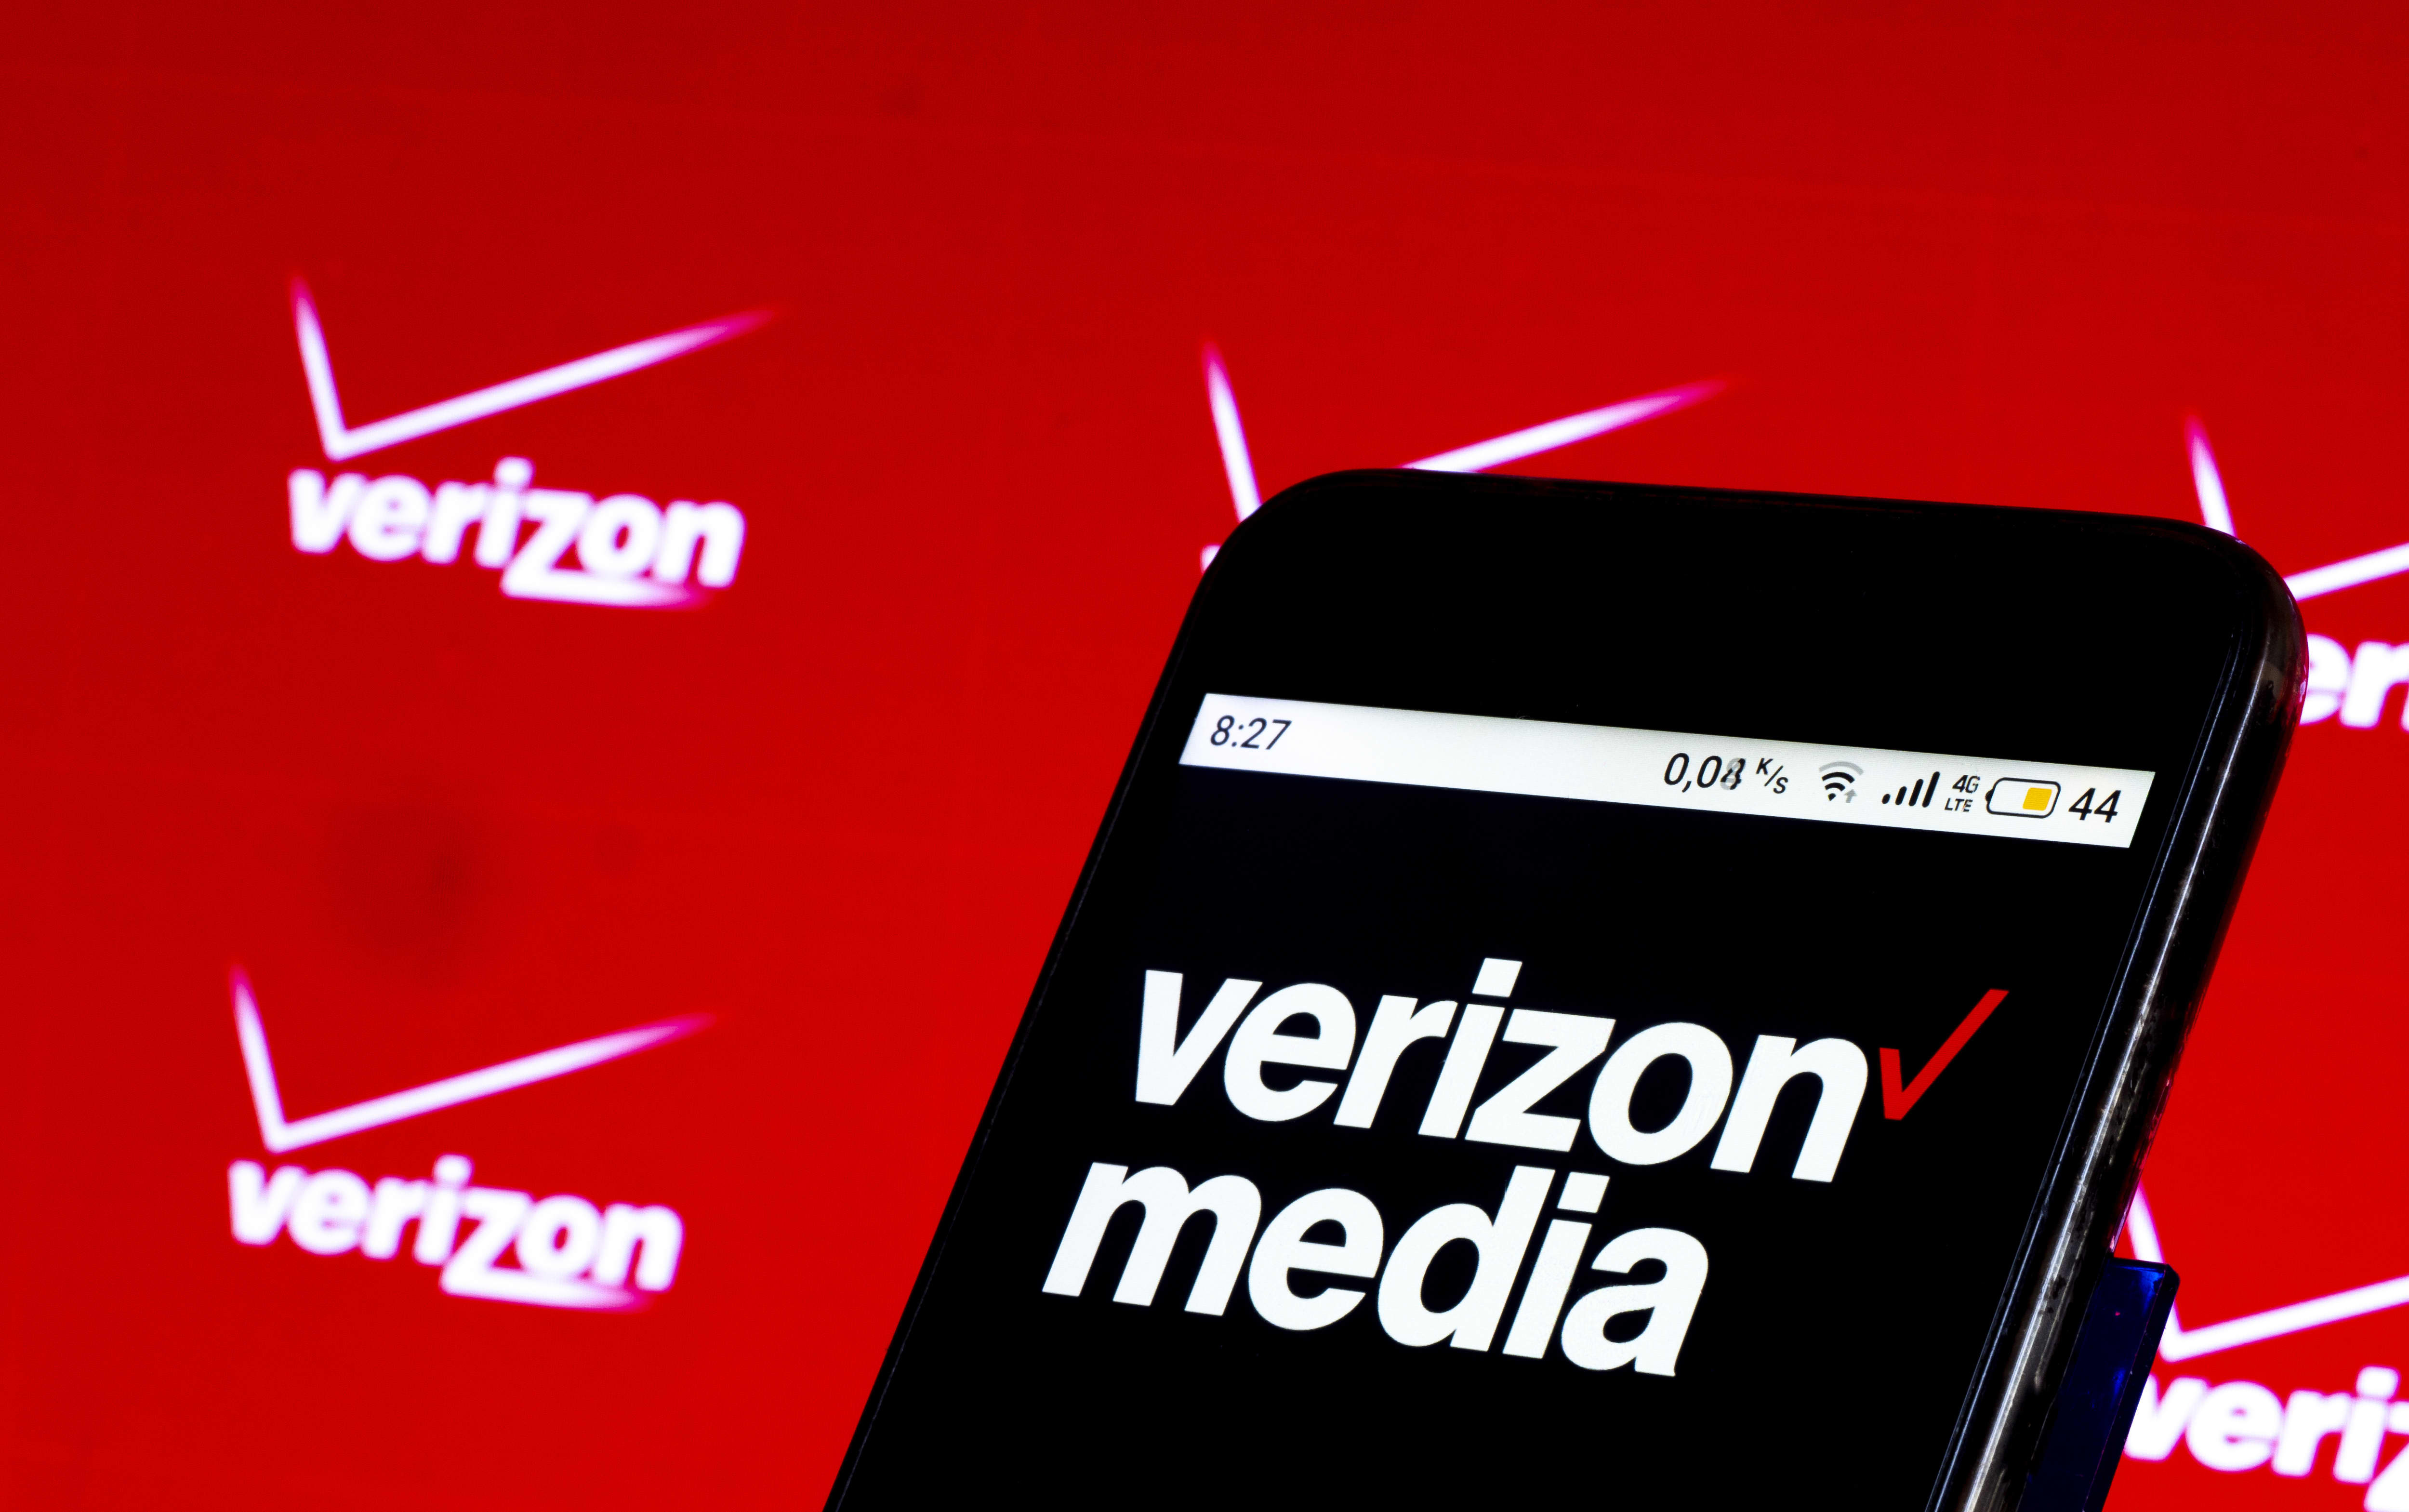 Verizon Media executives still don't know if they'll have jobs as Apollo seeks to close Yahoo deal